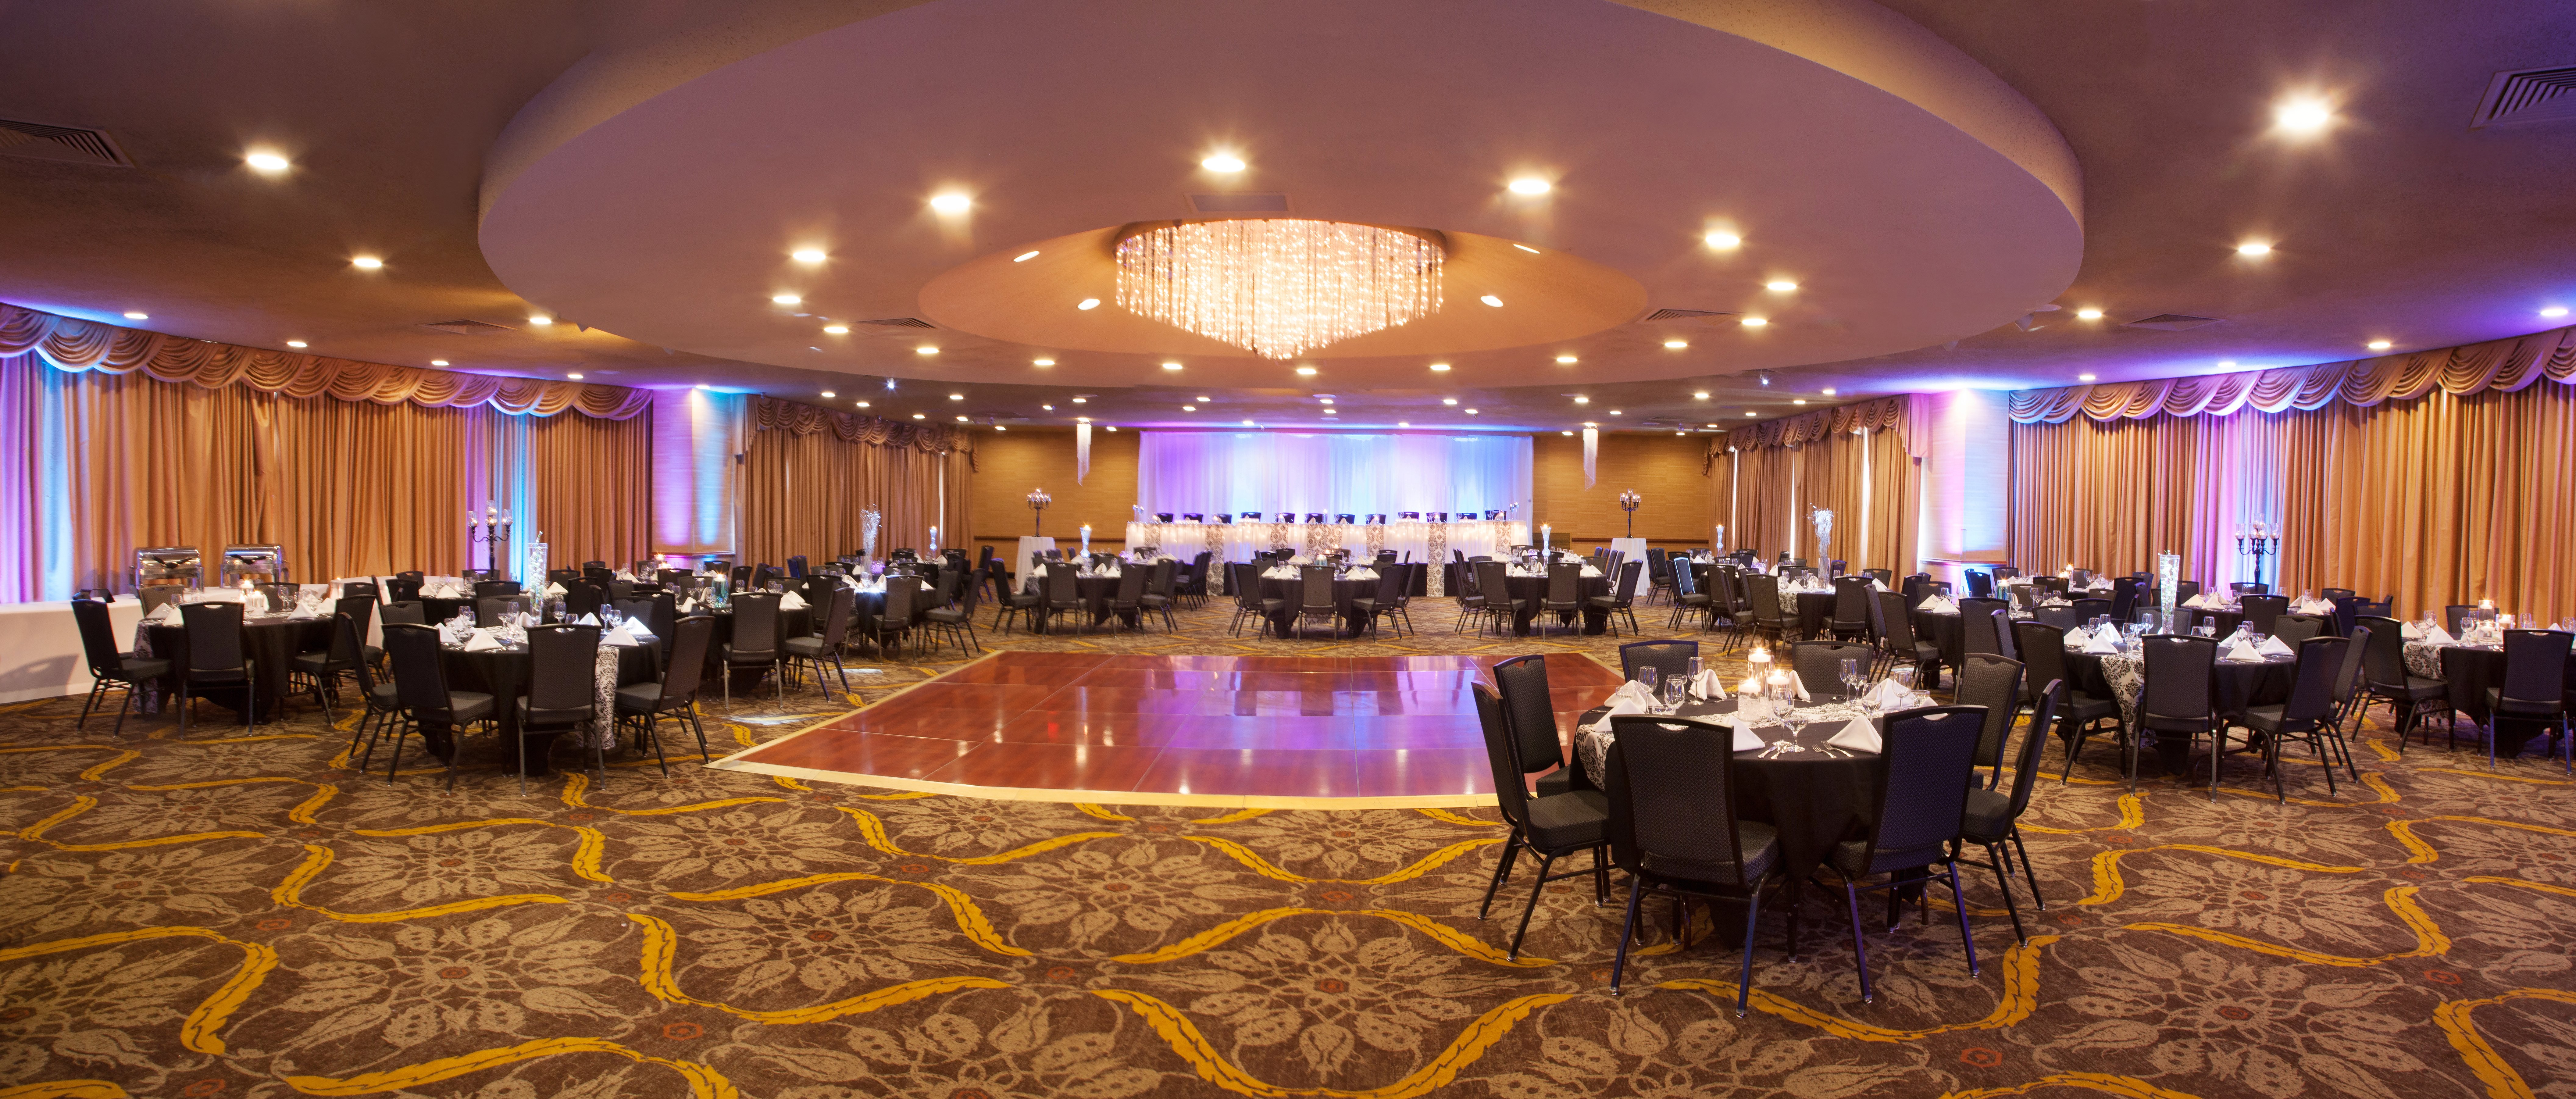 We are ready for your event in our beautiful ballroom